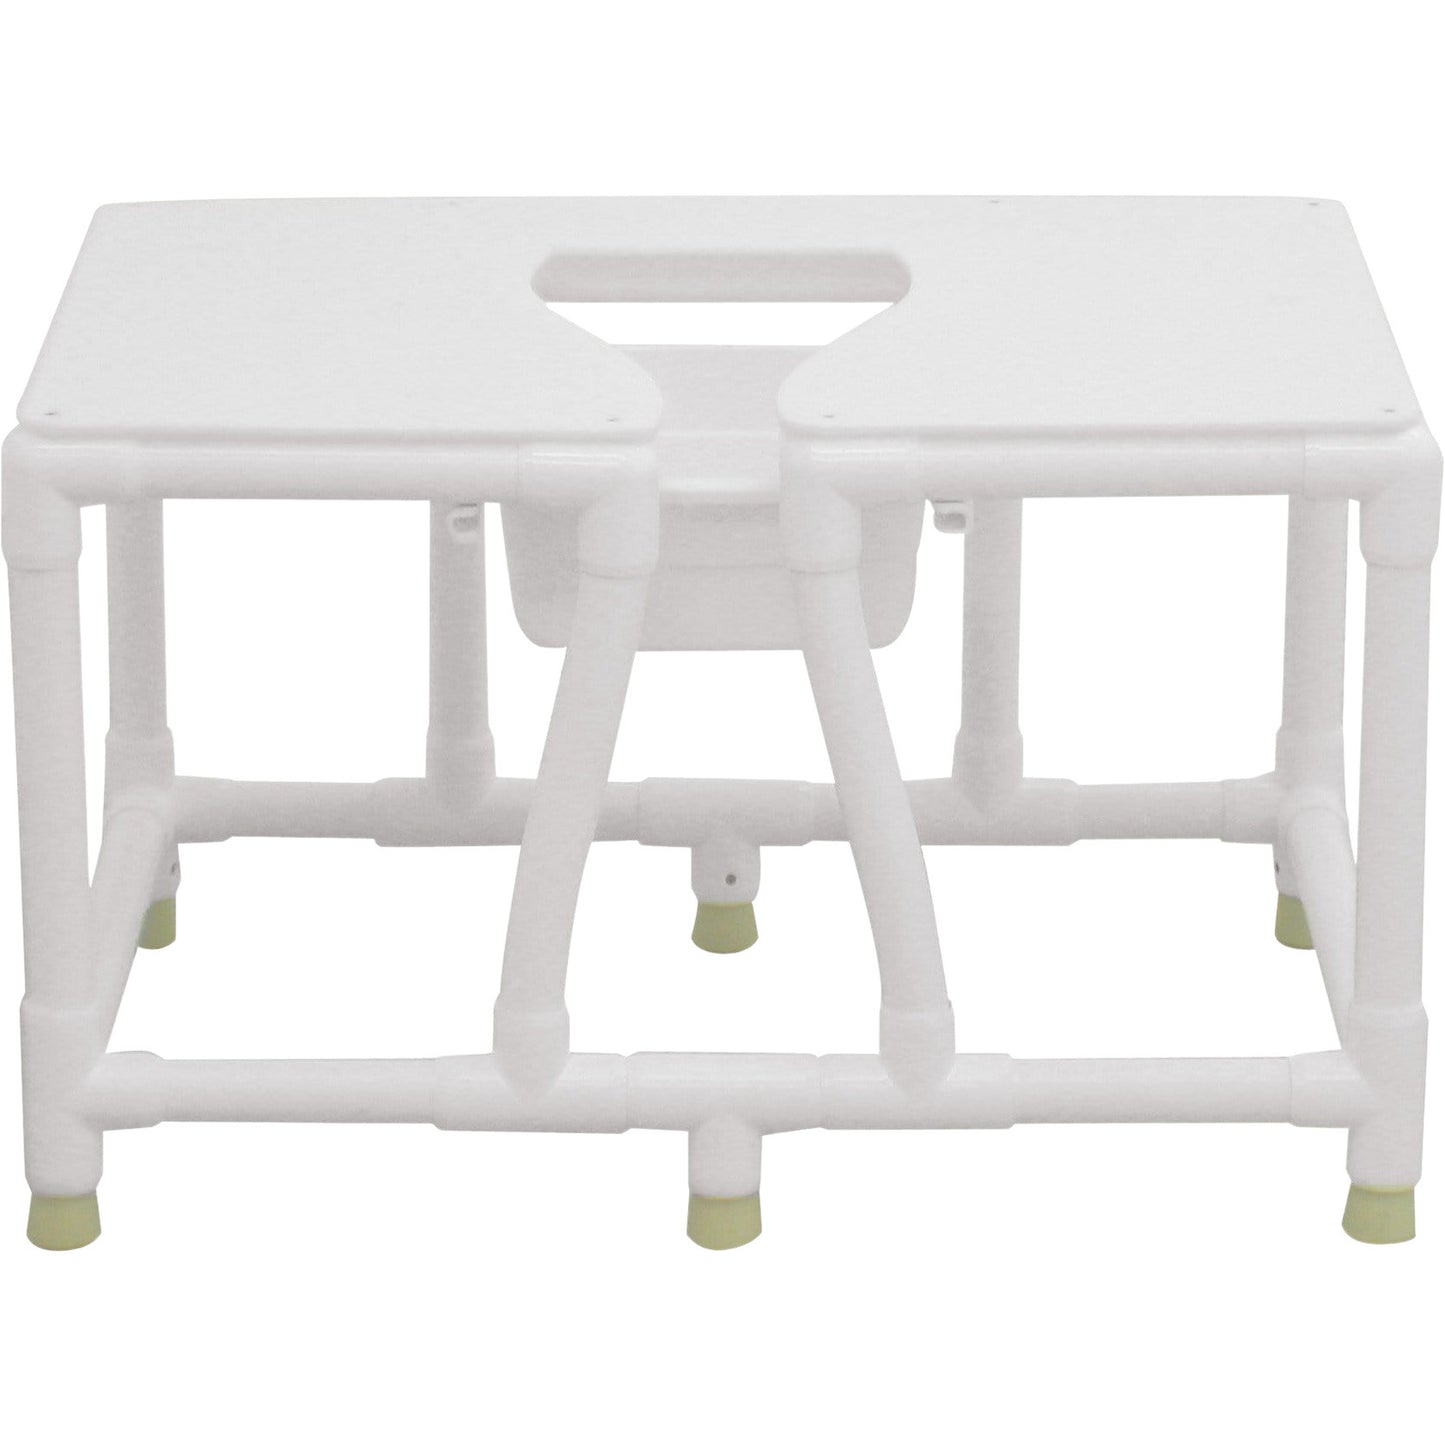 ConvaQuip Bedside Commodes - PVC Bariatric Commode - No Back Model 156-FSS-36 by ConvaQuip